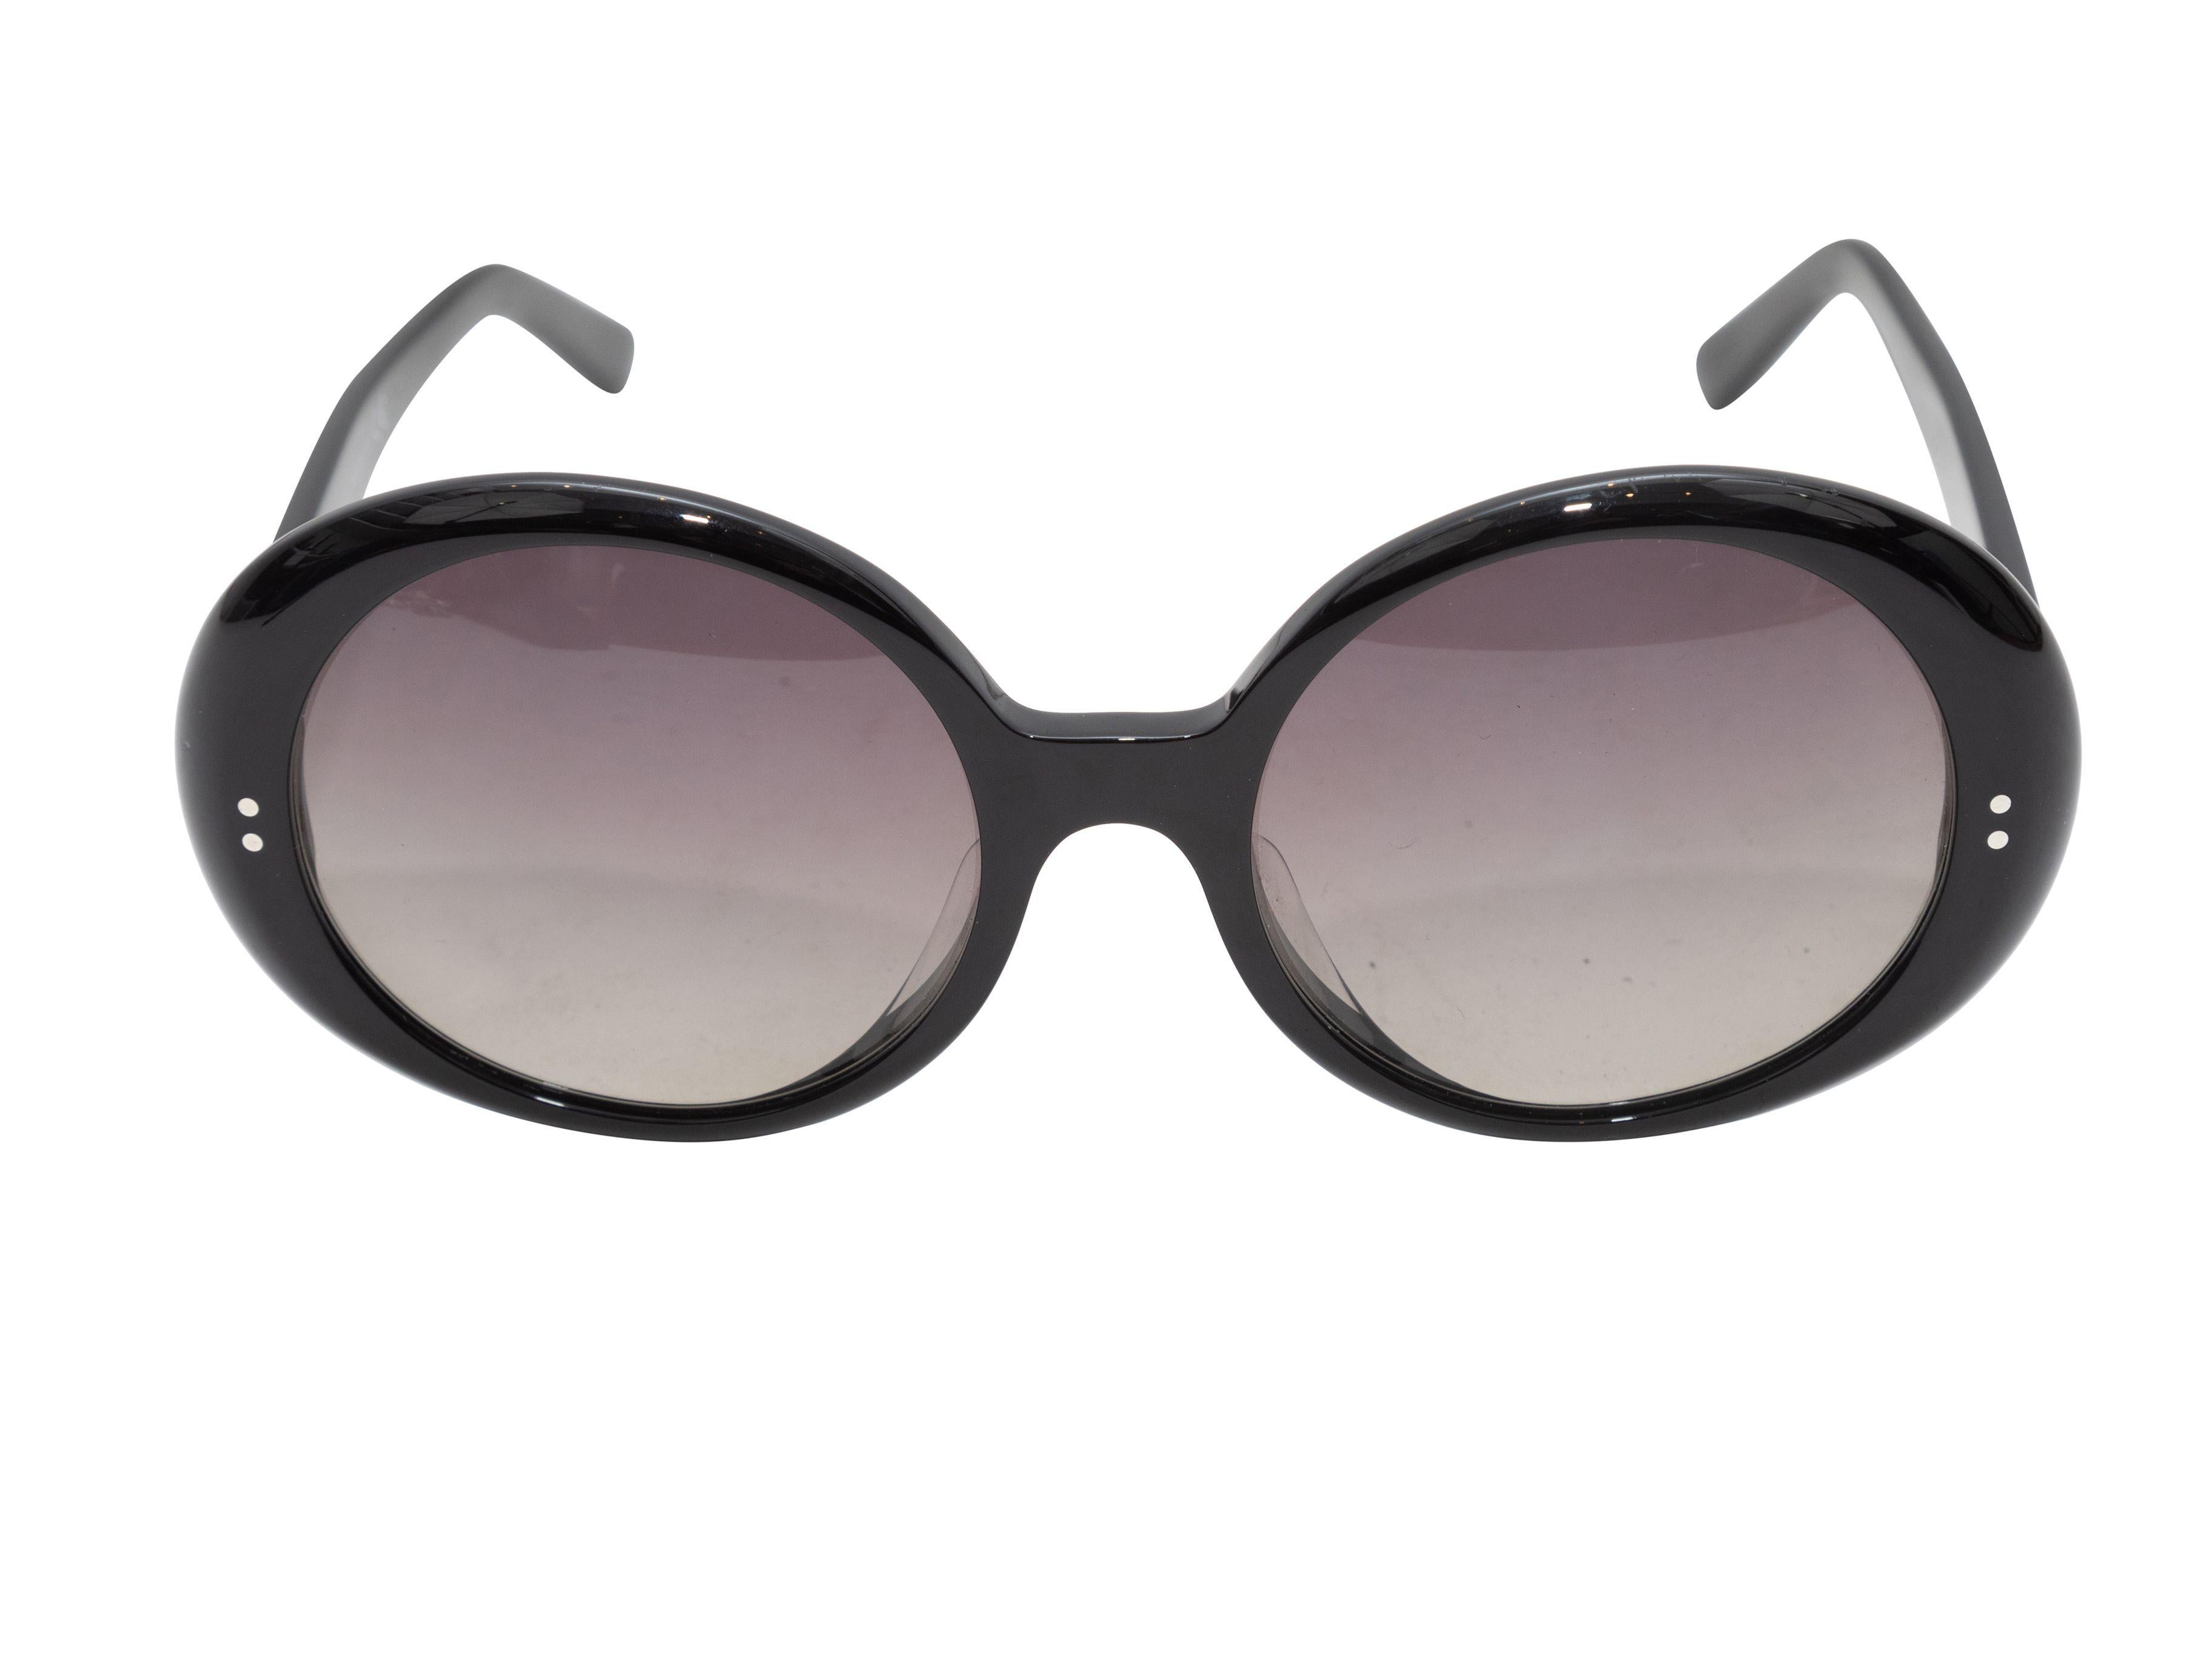 Product Details: Black oversize round acetate sunglasses by Celine. Grey tinted lenses. 2.5